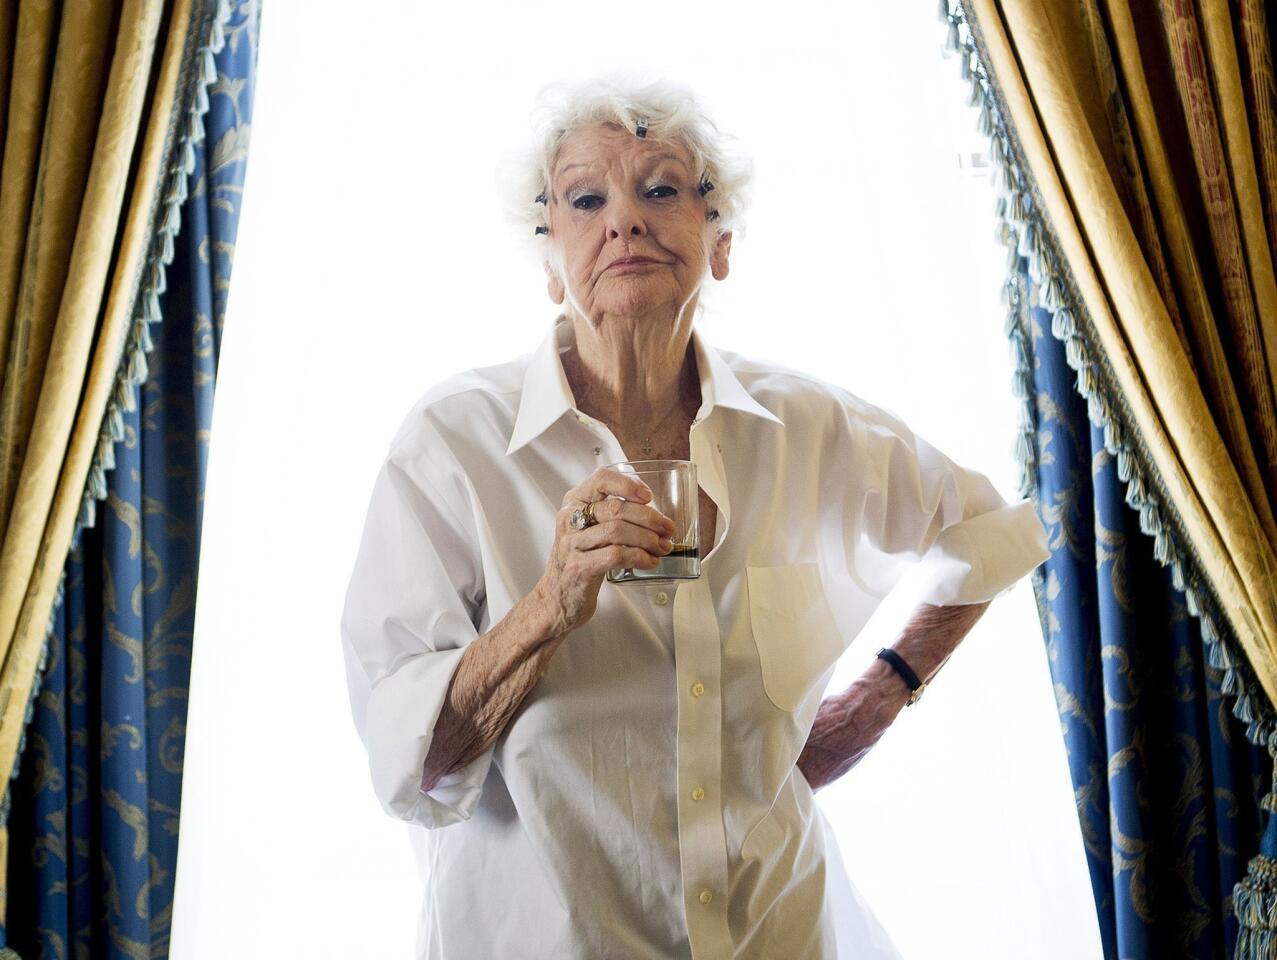 Elaine Stritch, whose forceful personality and salty language enlivened the New York stage for more than six decades, died July 17, 2014 at her home in Birmingham, Mich., at 89. Here's a look back at the life of the actress.